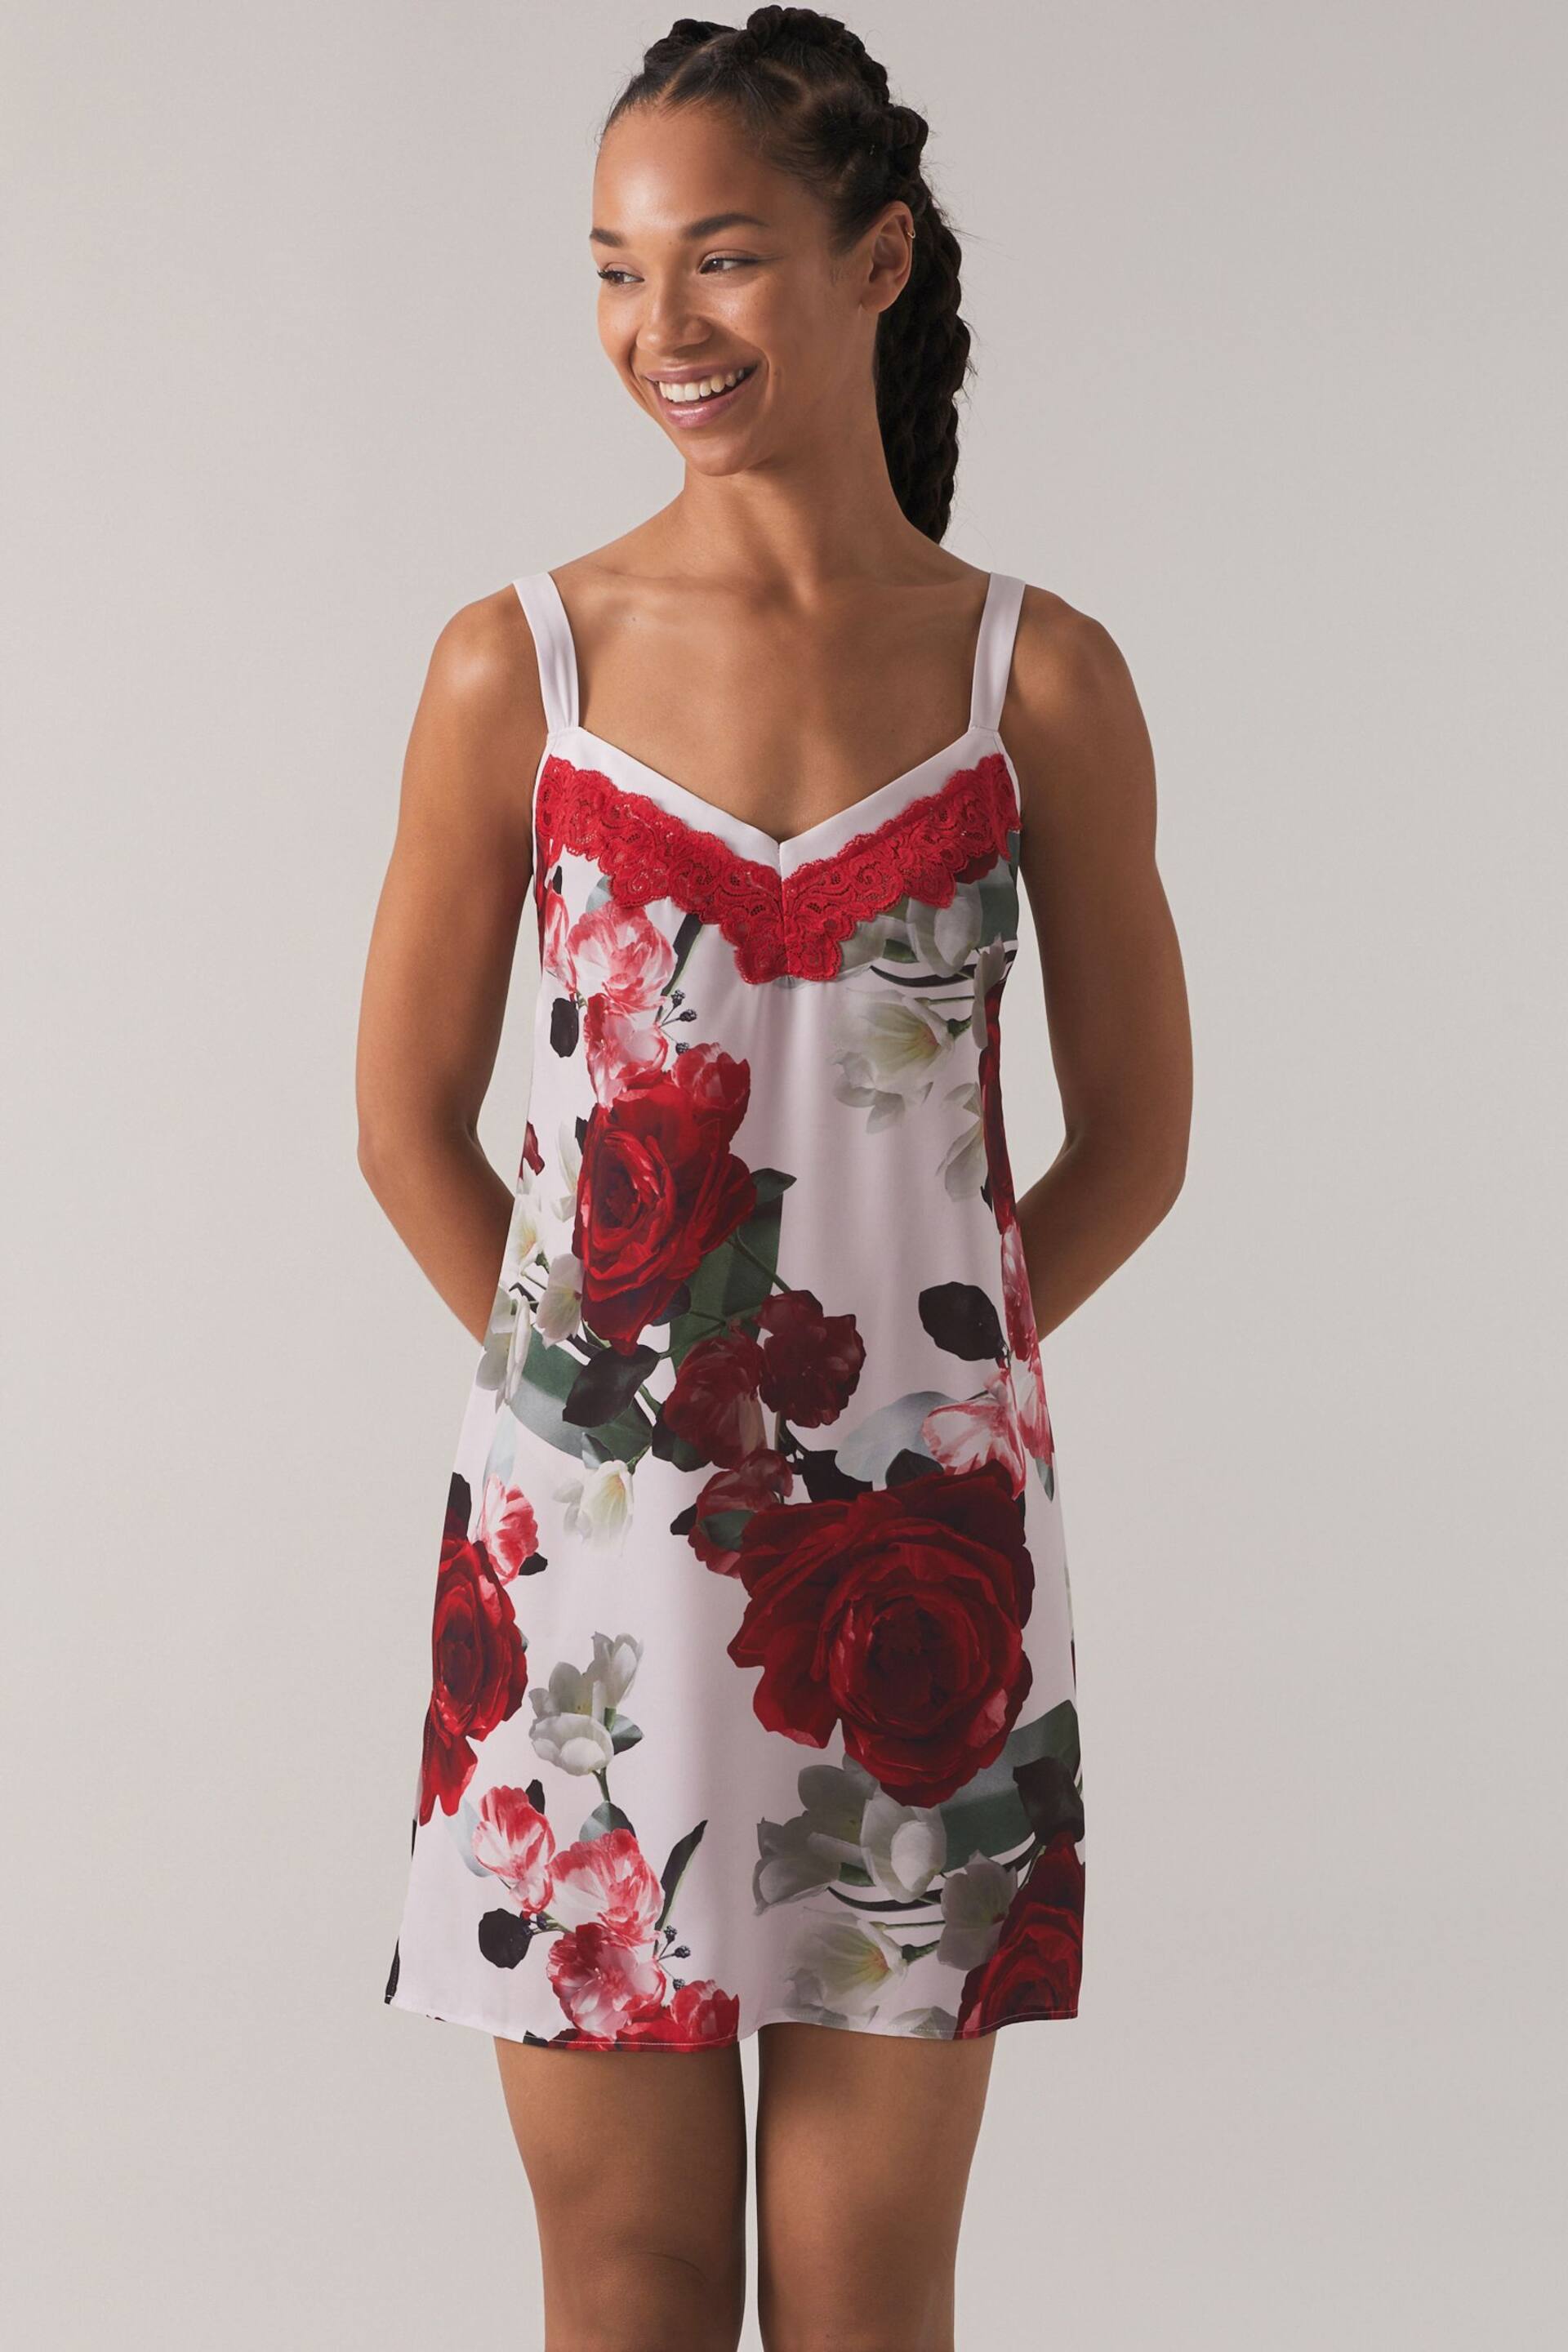 B by Ted Baker Floral Satin Lace Slip Night Dress - Image 4 of 8